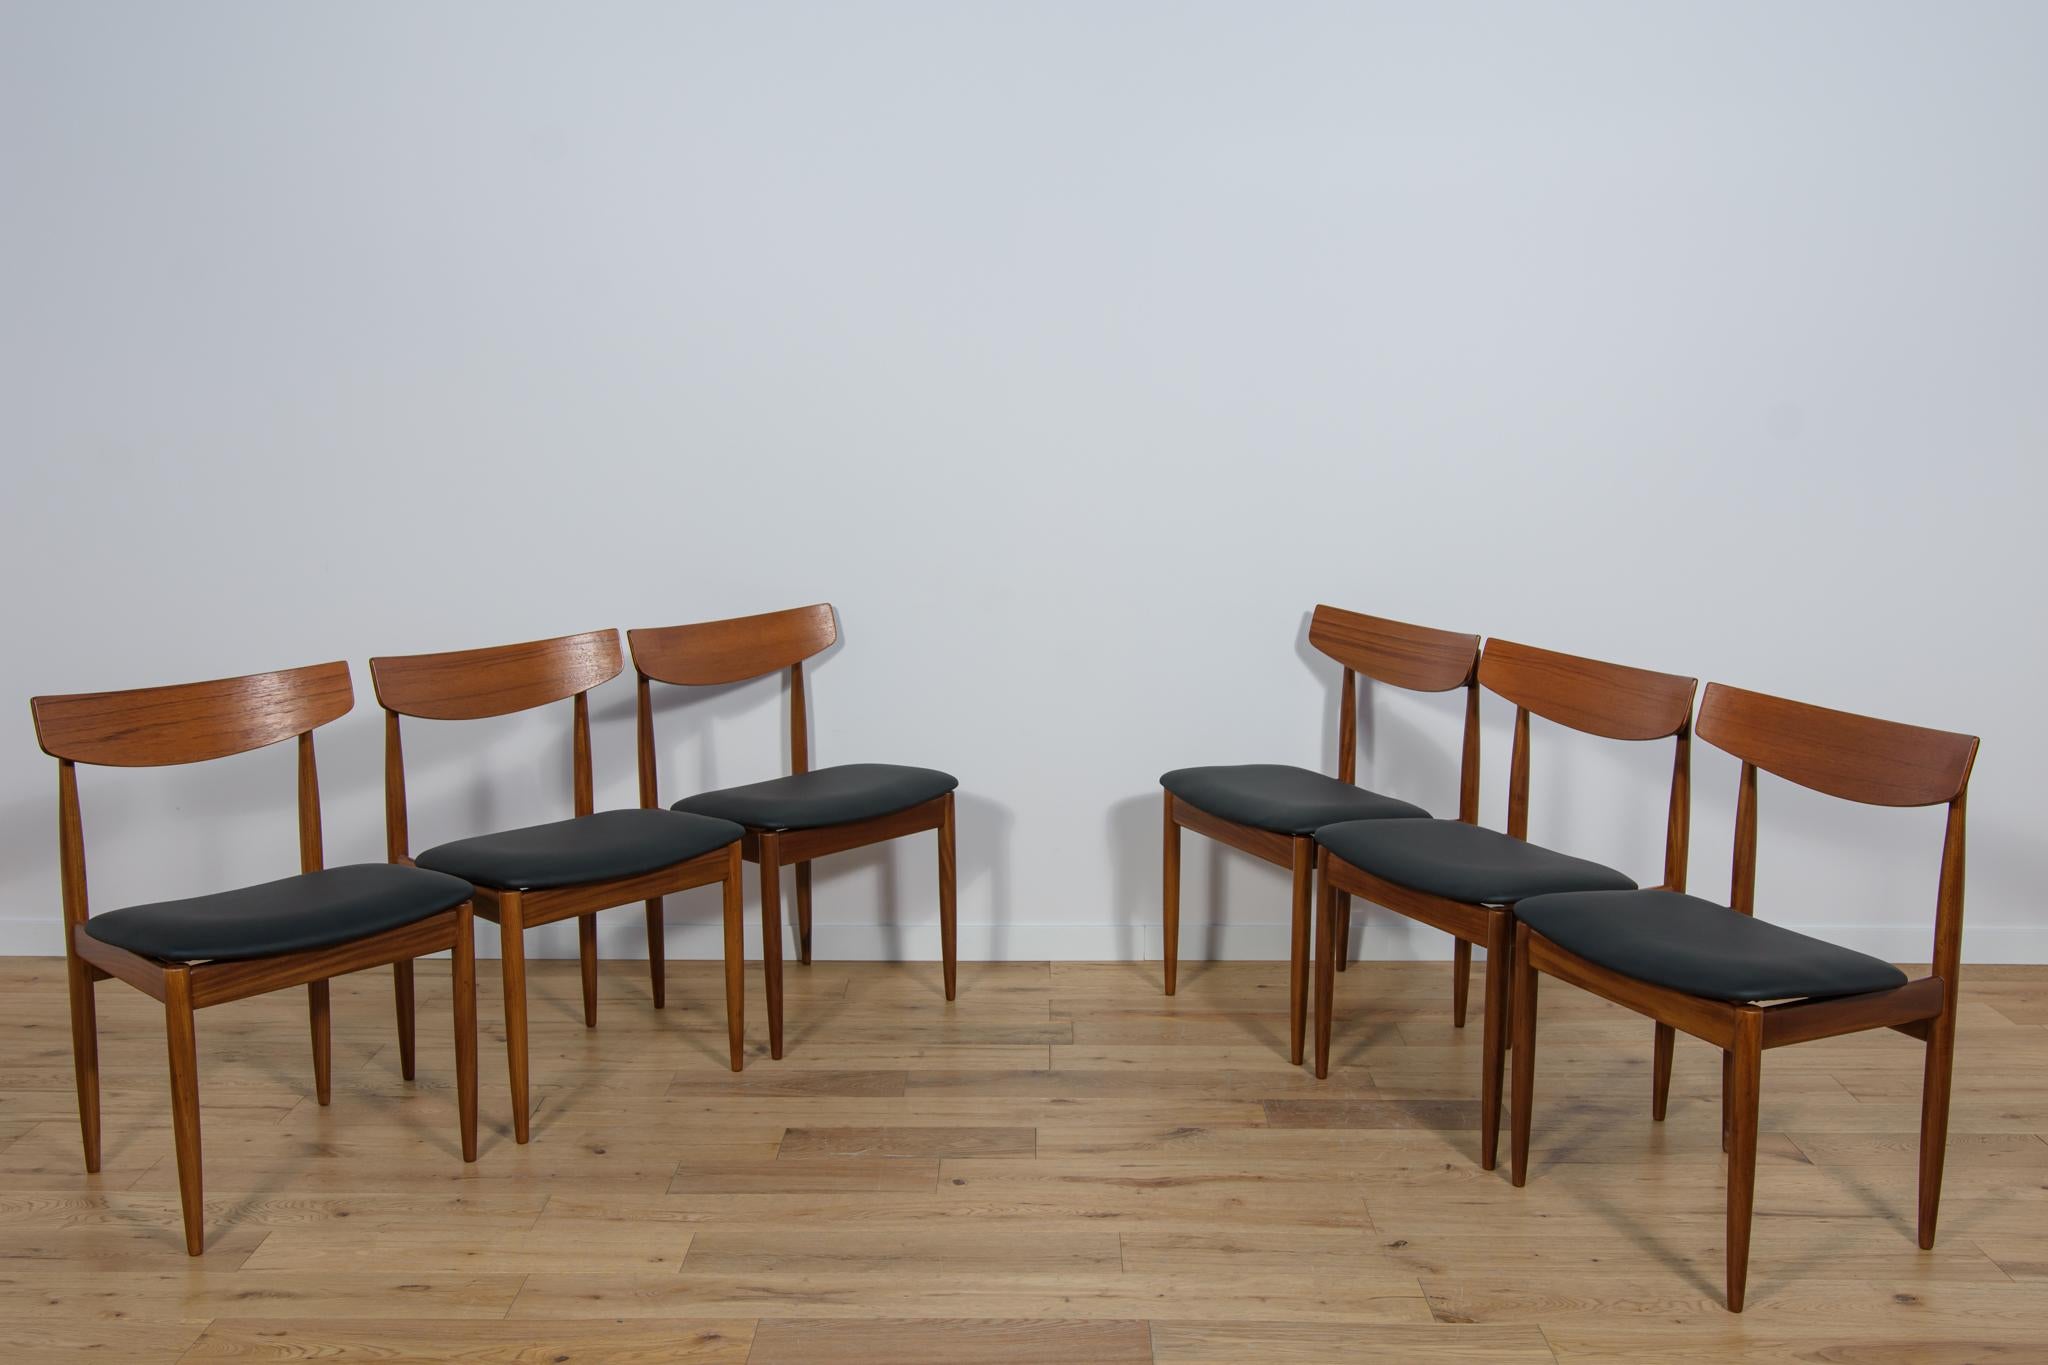 Mid-20th Century Mid-Century Dining Chairs in Teak by Ib Kofod Larsen for G-Plan, 1960s.